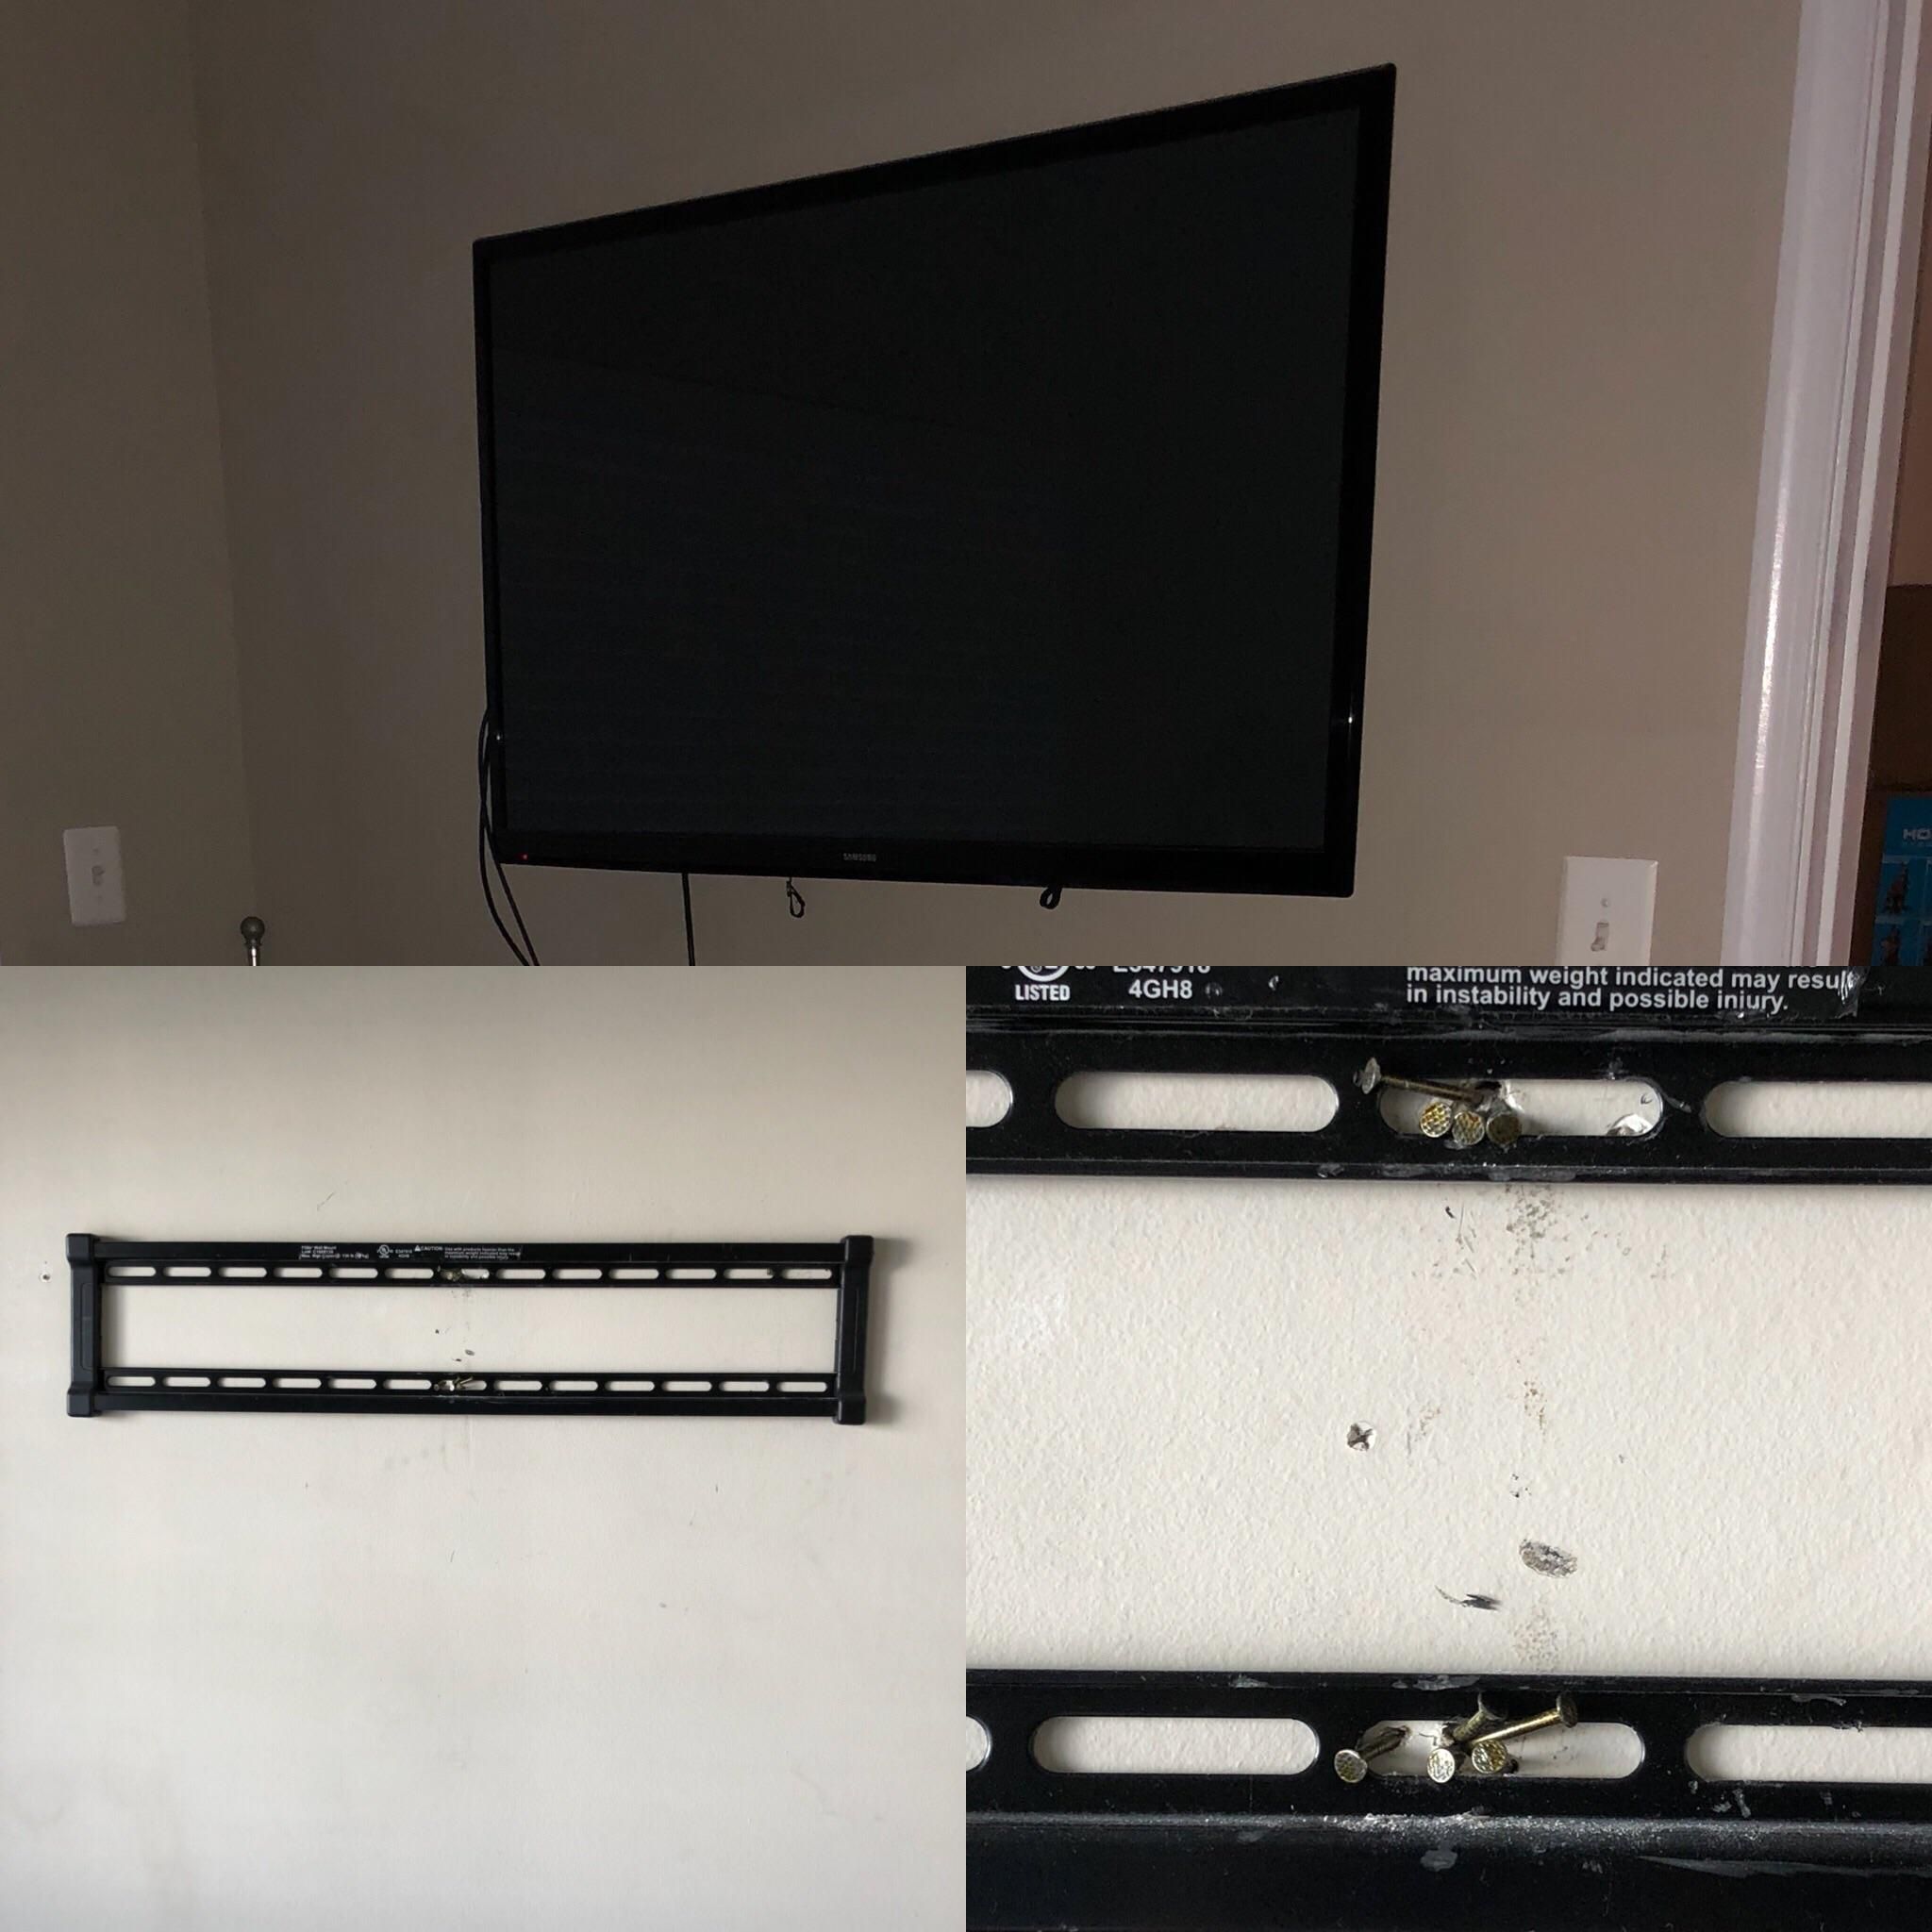 When you’re moving and you take down your TV only to realize you paid the community “handy man” $40.00 for something you could’ve done better yourself...